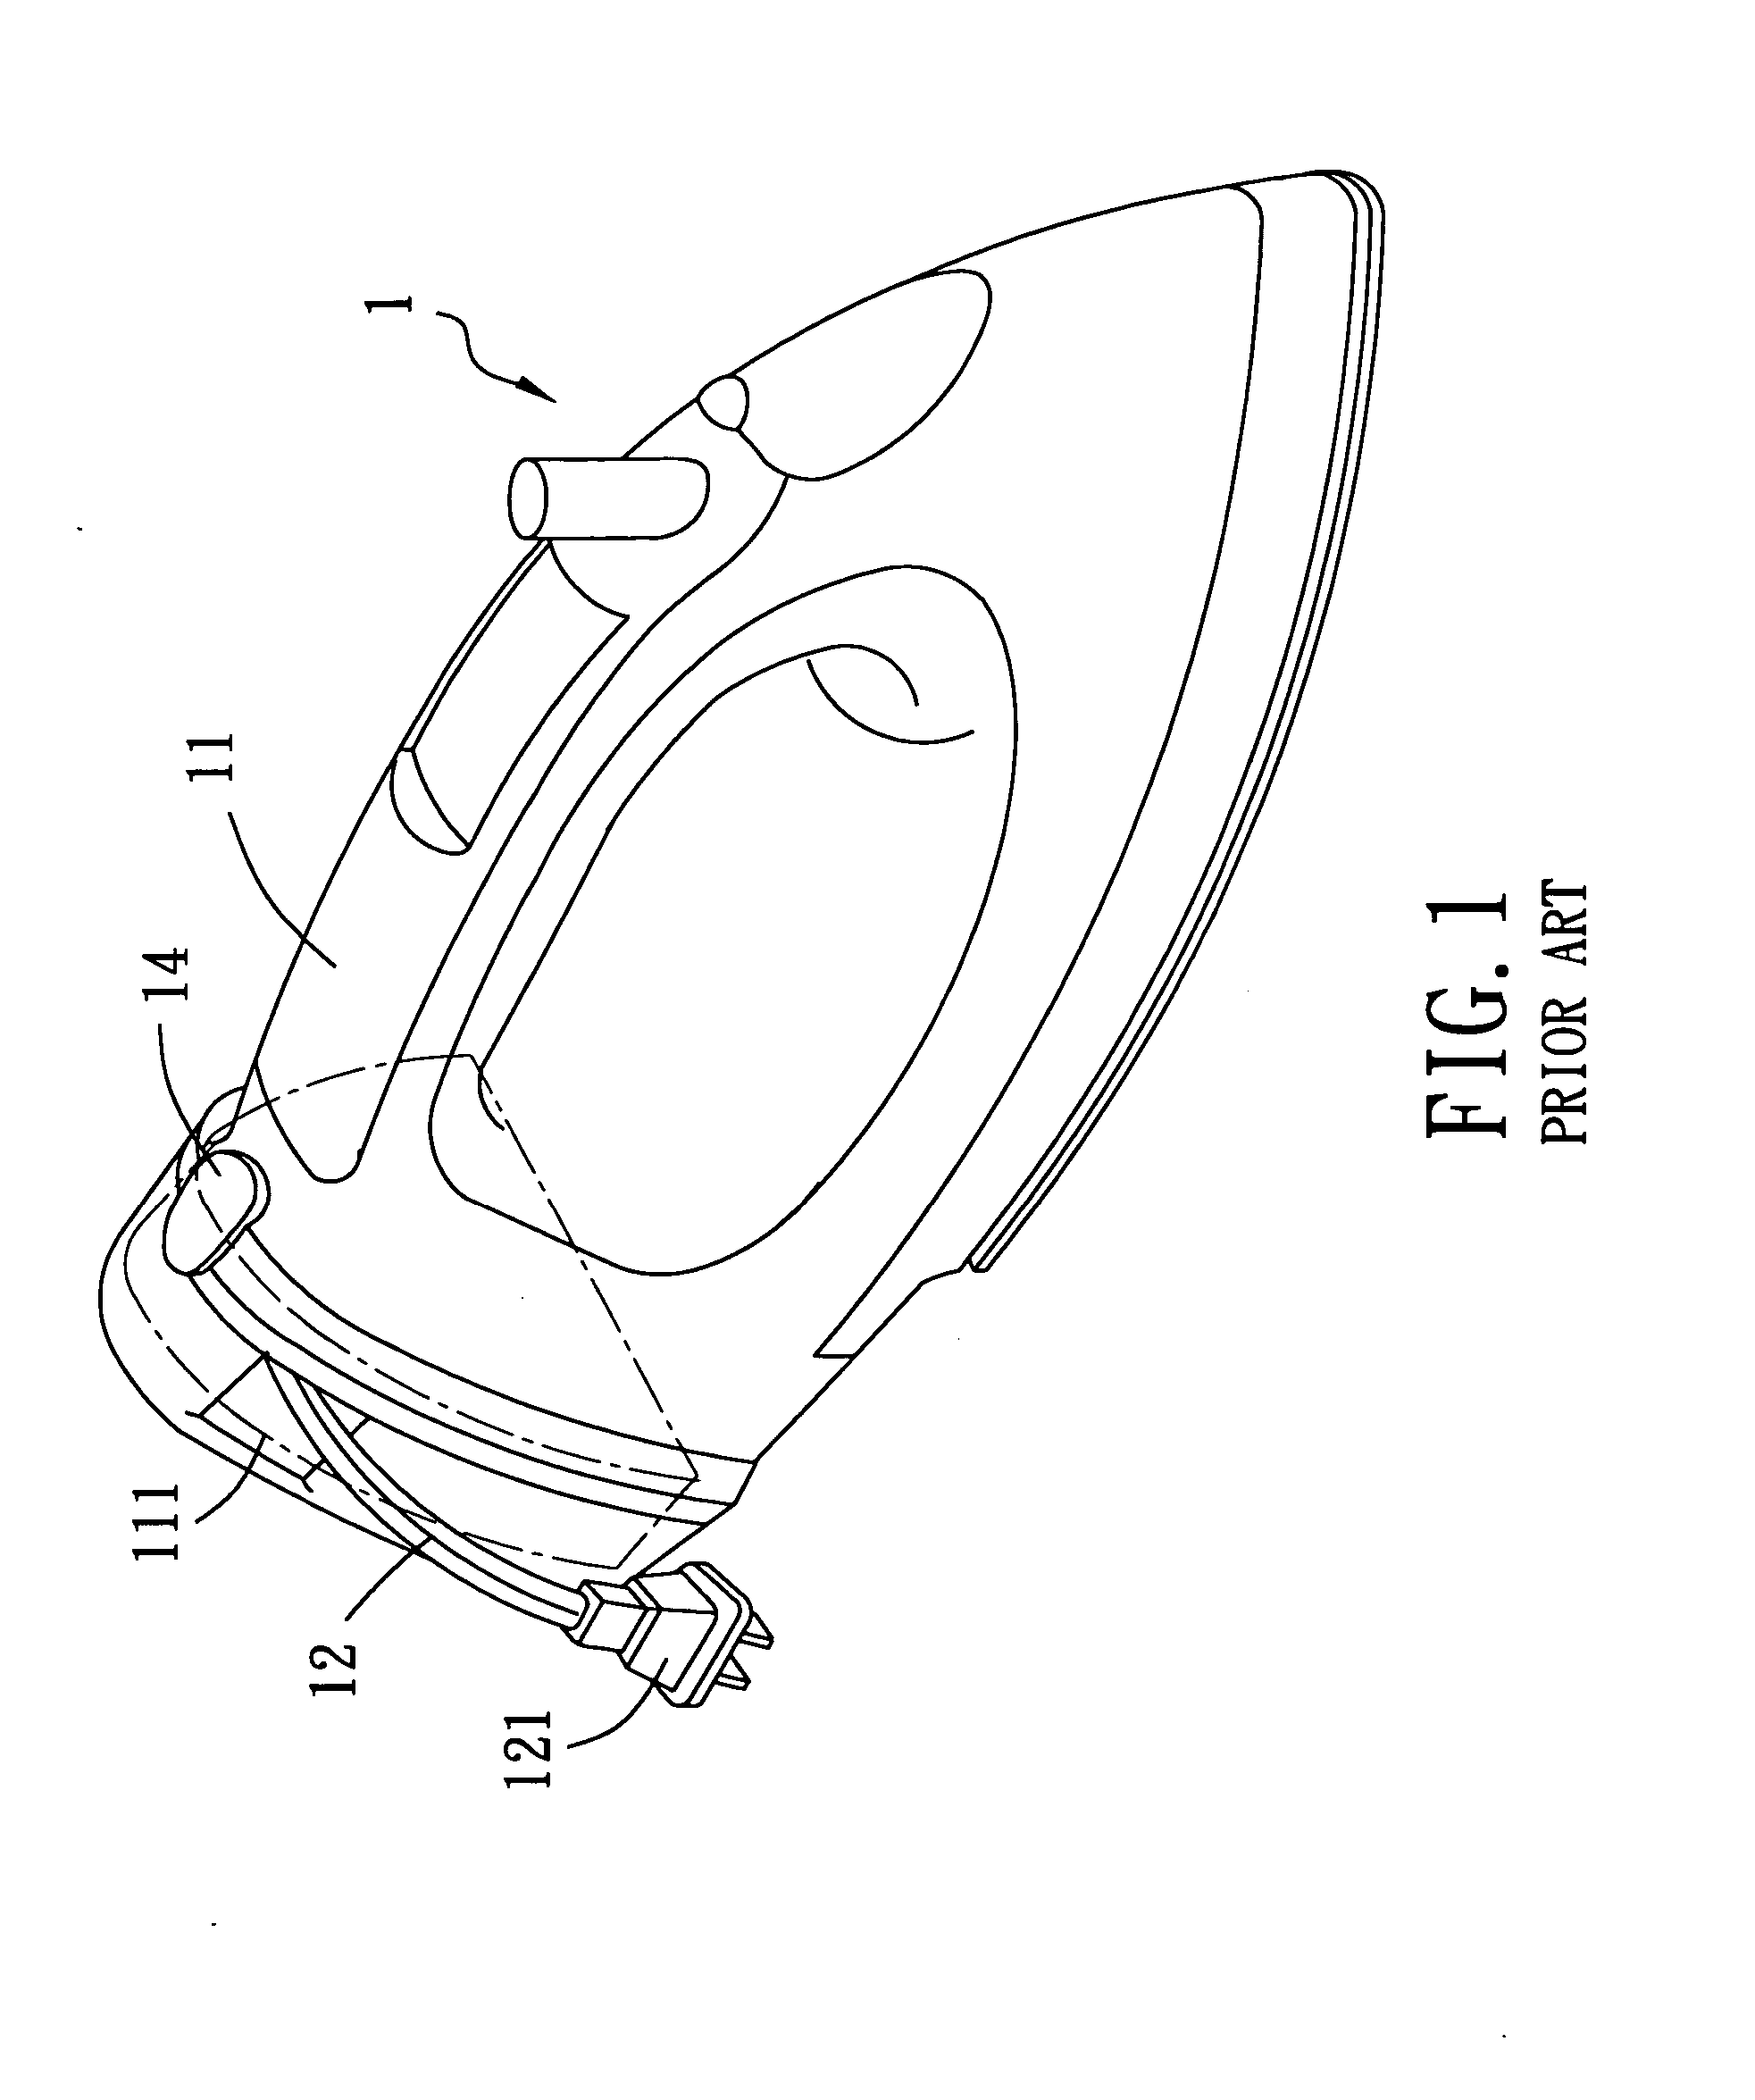 Electrical appliance having a wire winding device